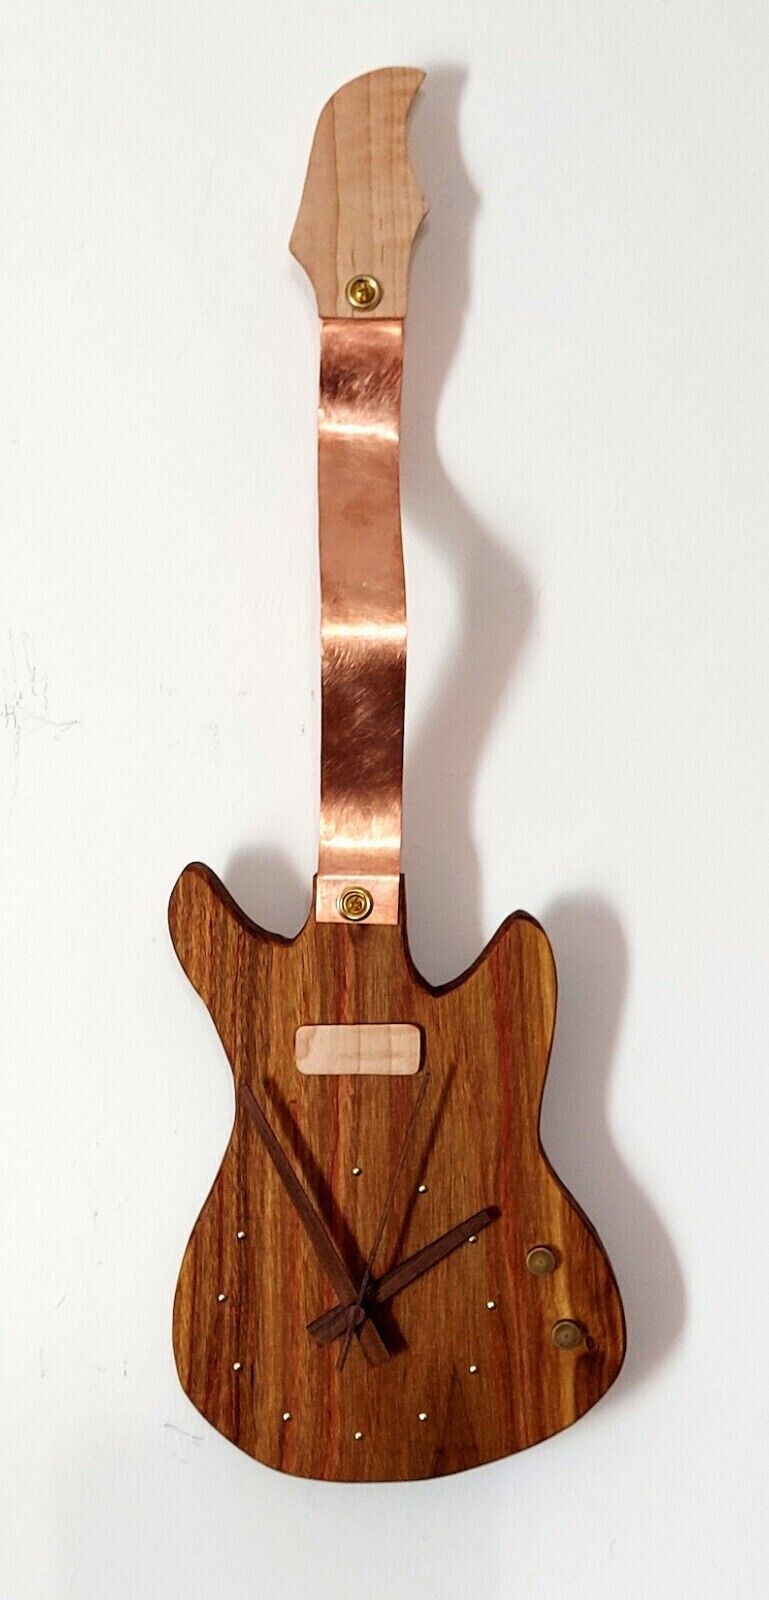 Guitar Wall Clock uses Unique handmade exotic hardwood Canary Wood for the body